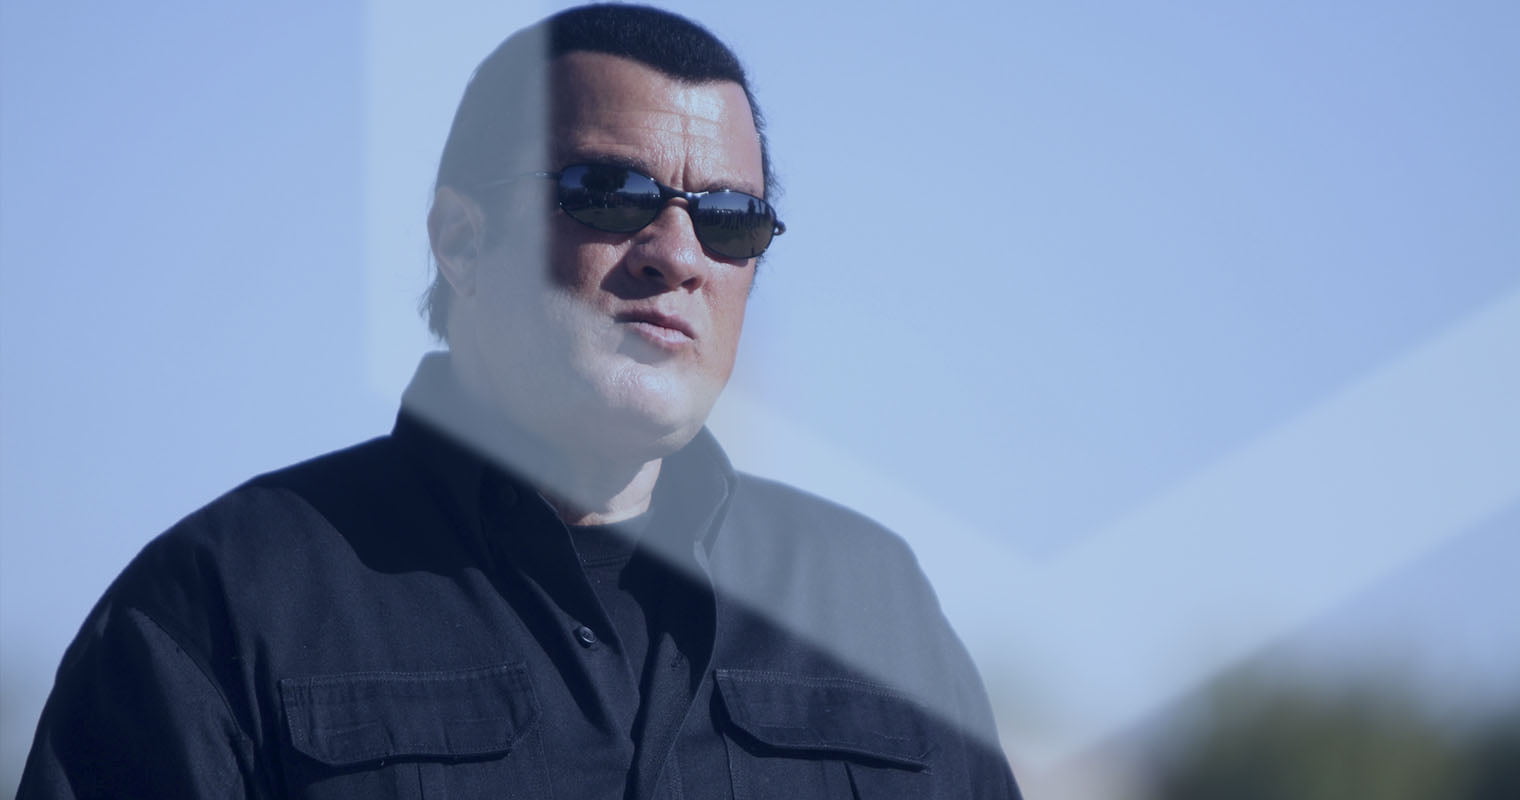 Steven Seagal-backed “Bitcoiin B2G” is Cracked Down by New Jersey